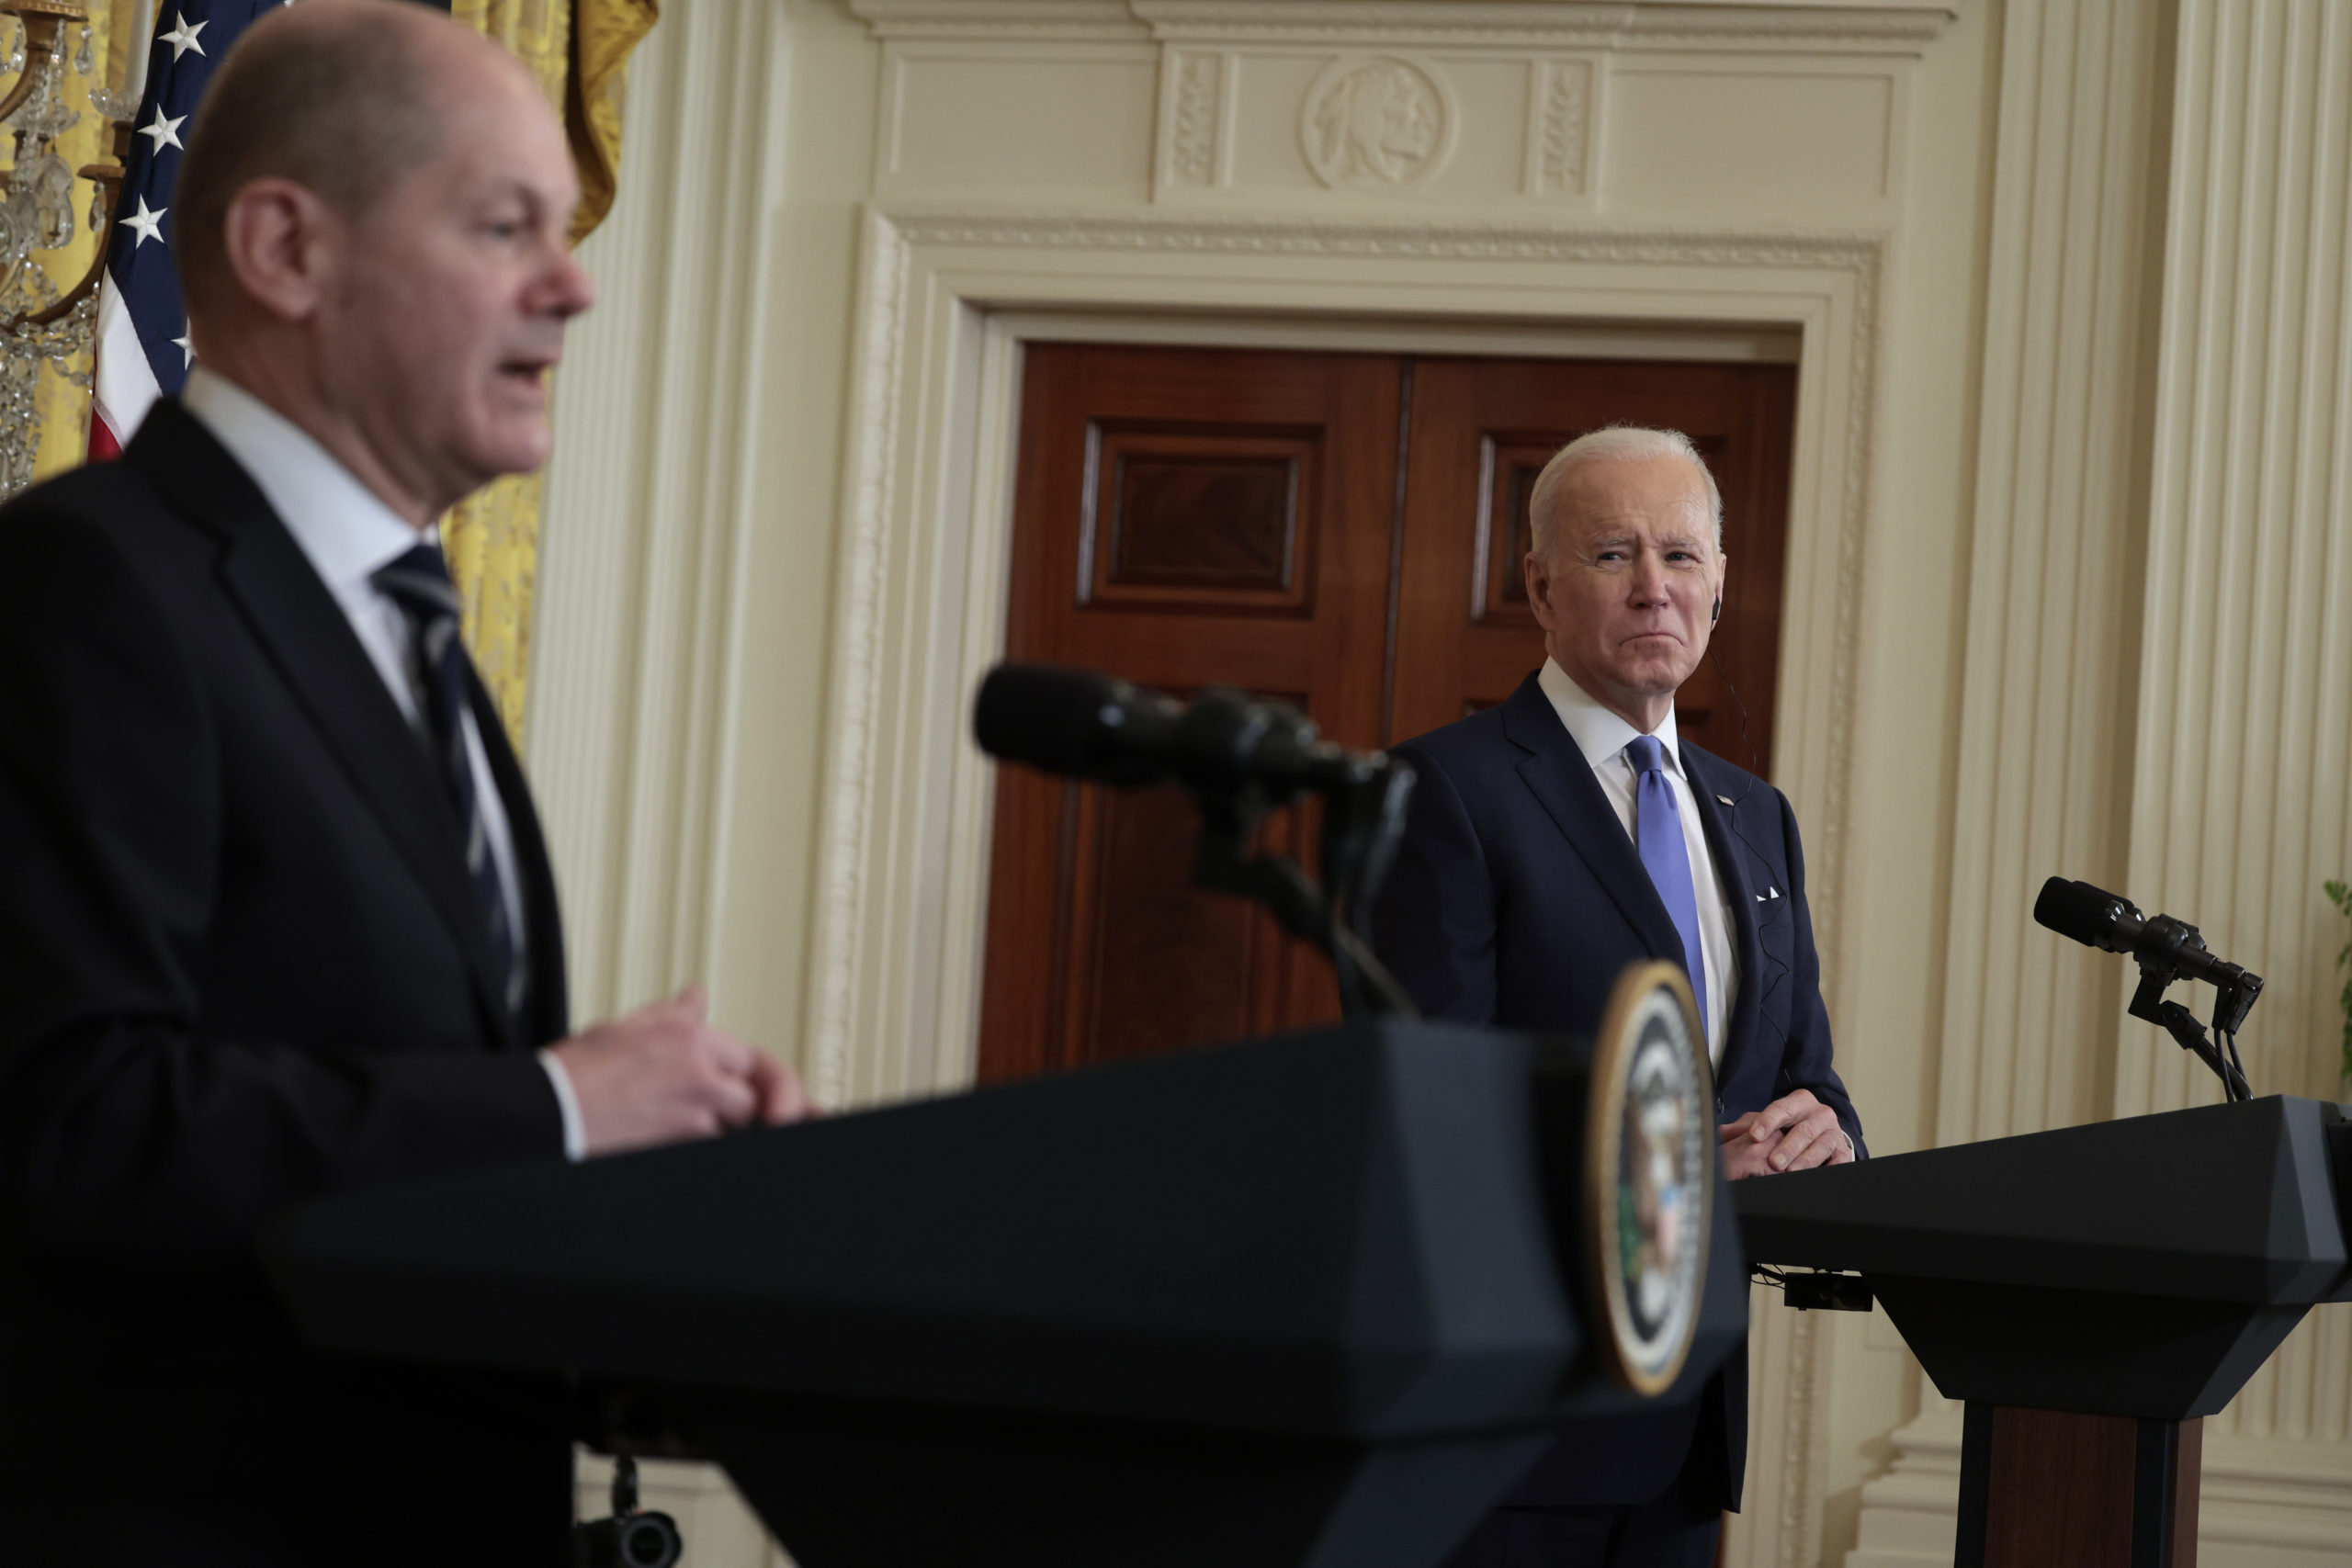 President Joe Biden listens as German Chancellor Olaf Scholz delivers remarks during a joint news conference at the White House on Feb. 7. (Anna Moneymaker/Getty Images)